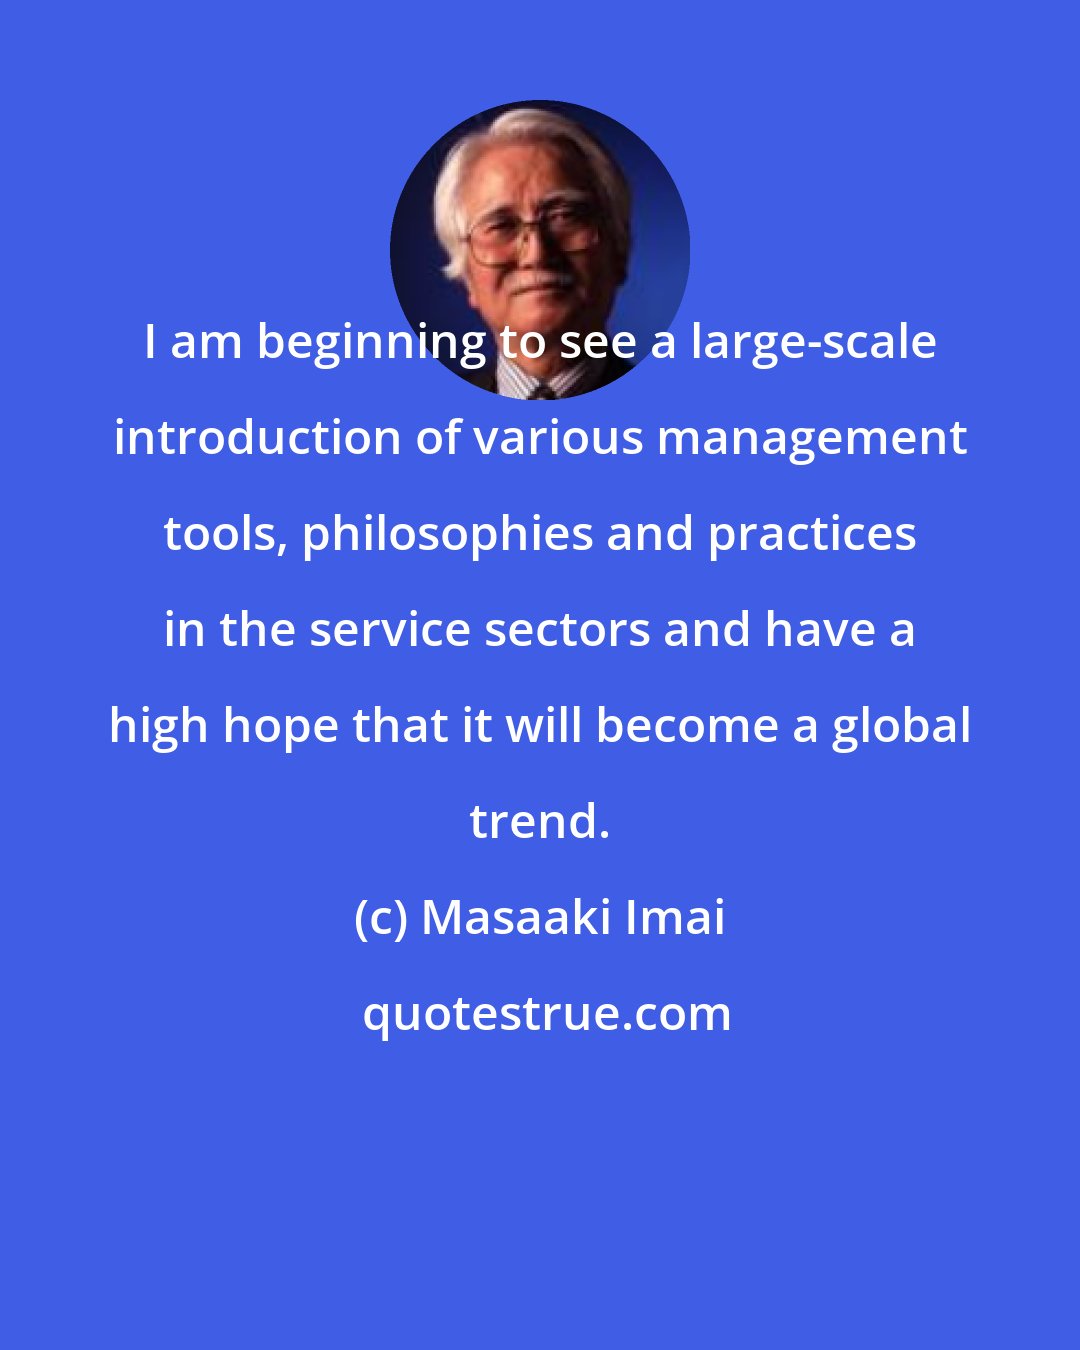 Masaaki Imai: I am beginning to see a large-scale introduction of various management tools, philosophies and practices in the service sectors and have a high hope that it will become a global trend.